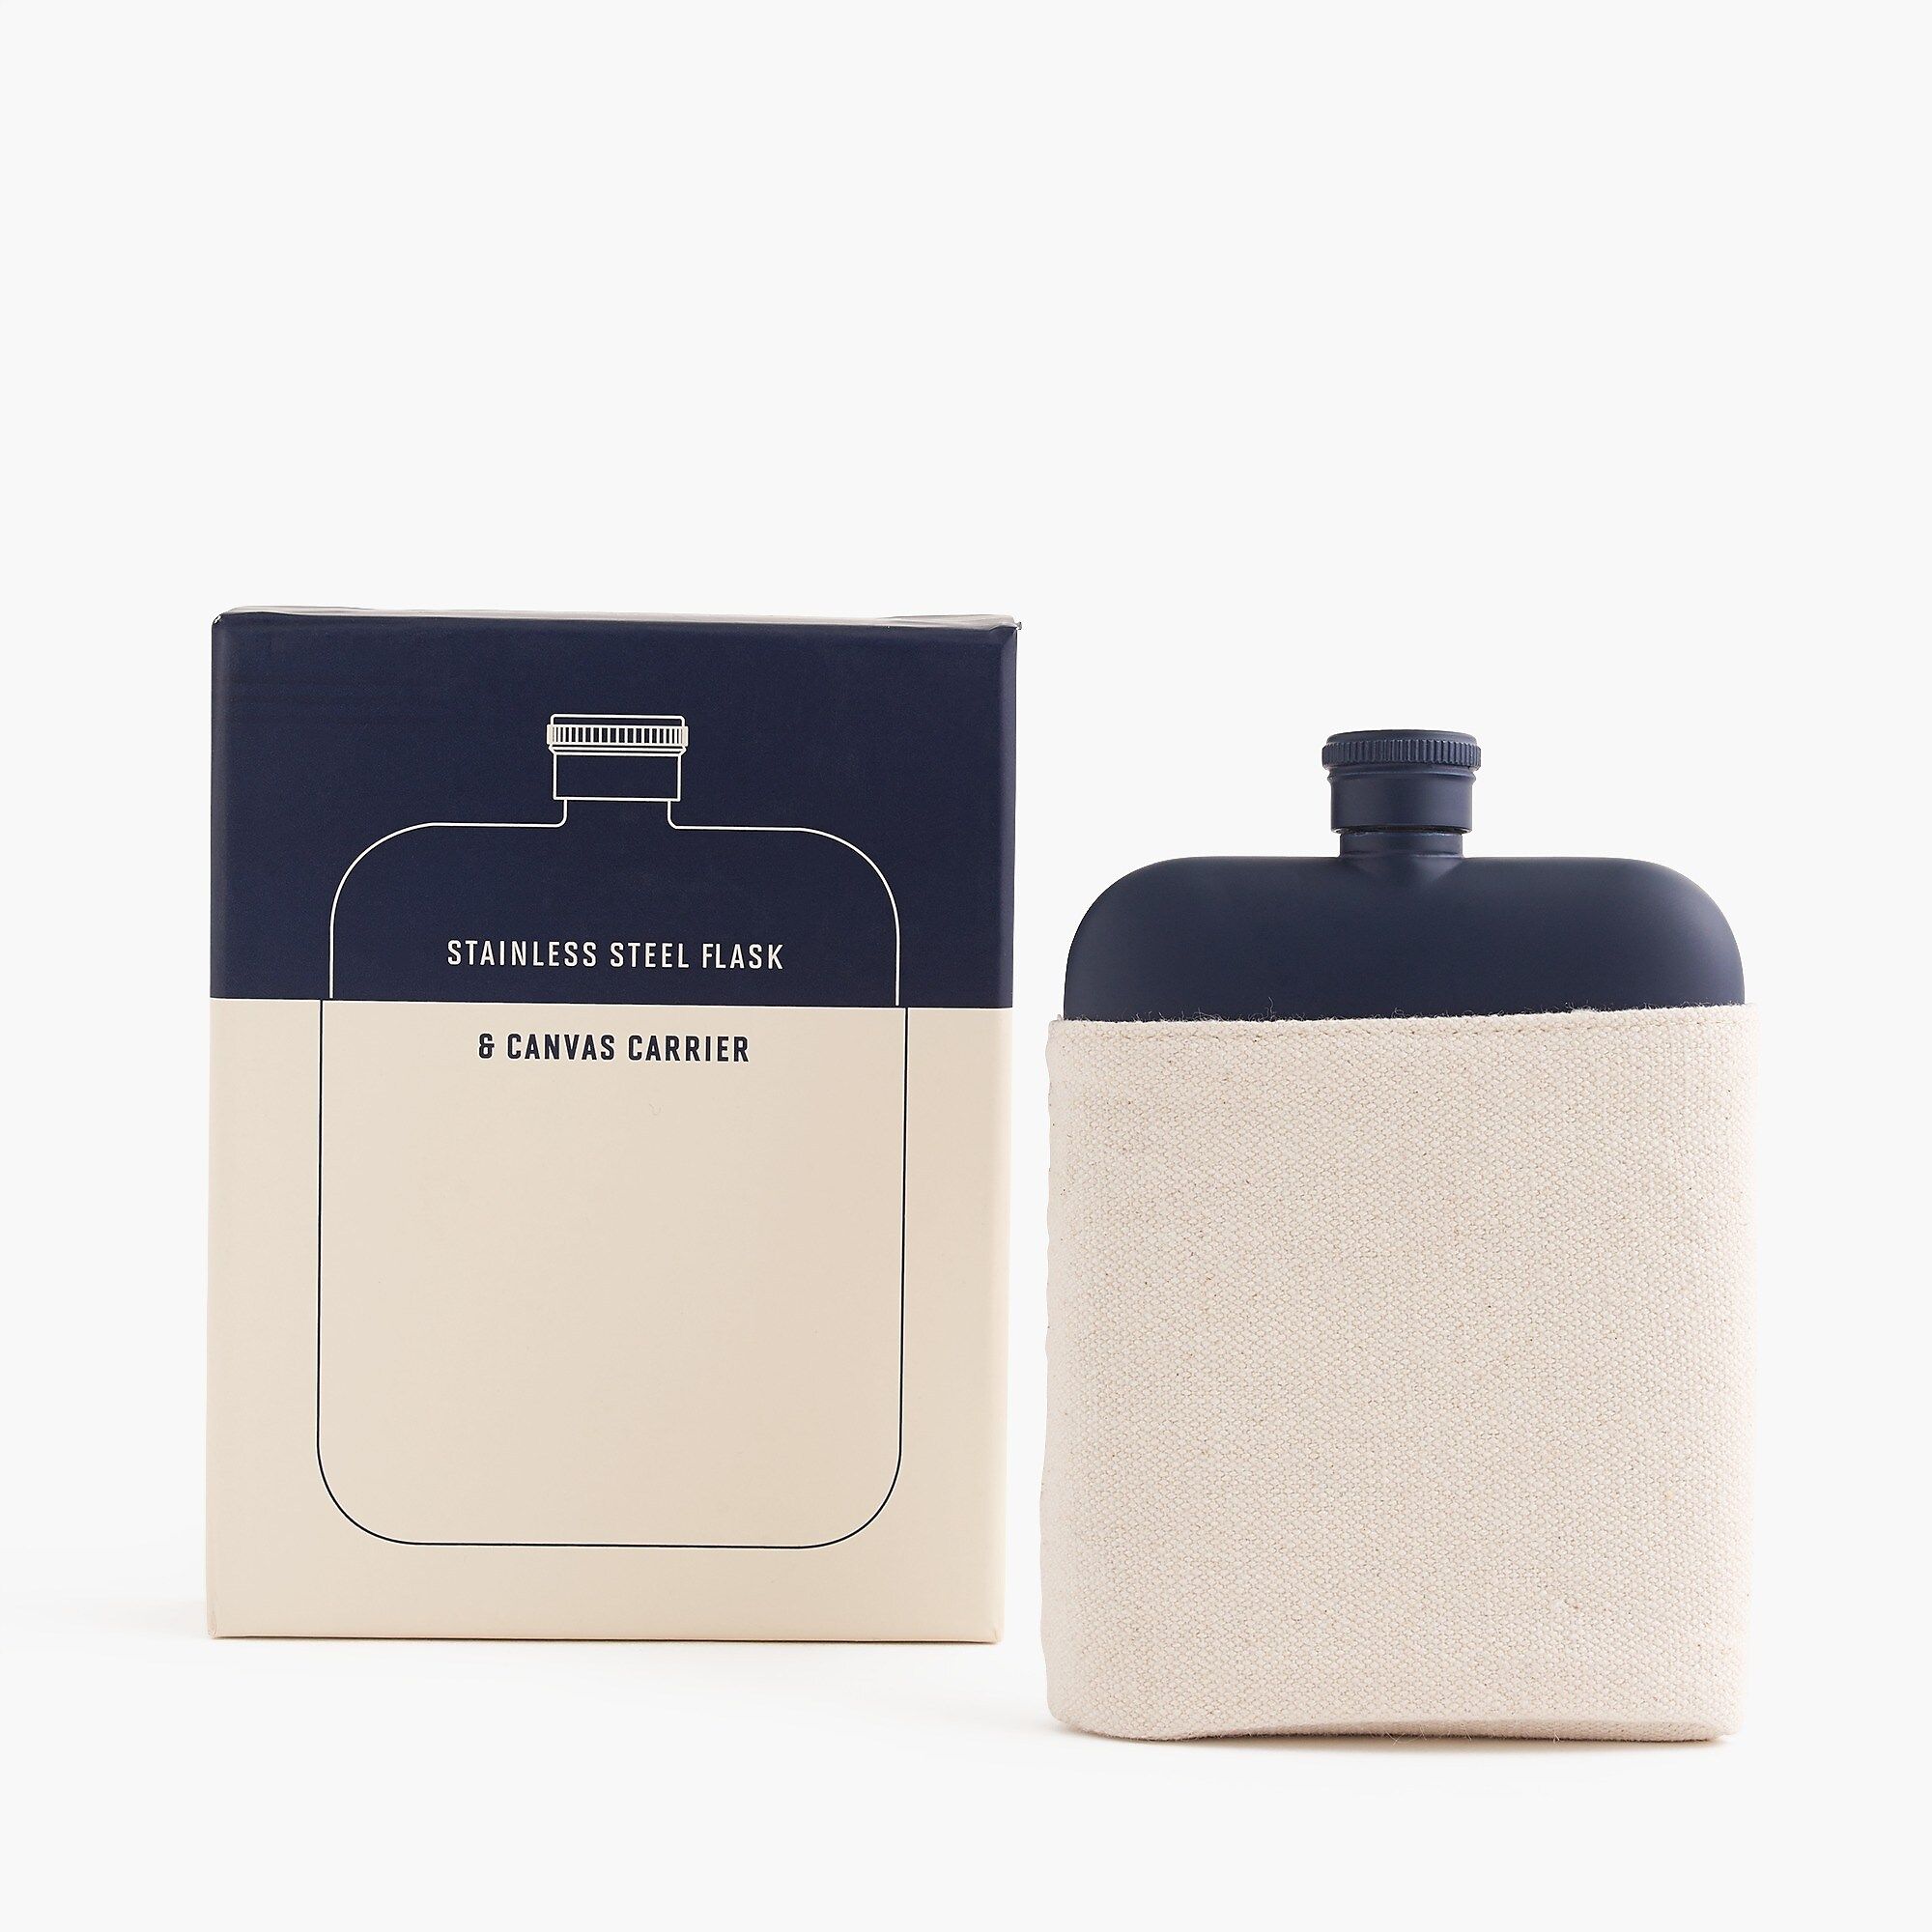 Izola™ stainless steel flask with canvas carrier | J.Crew US